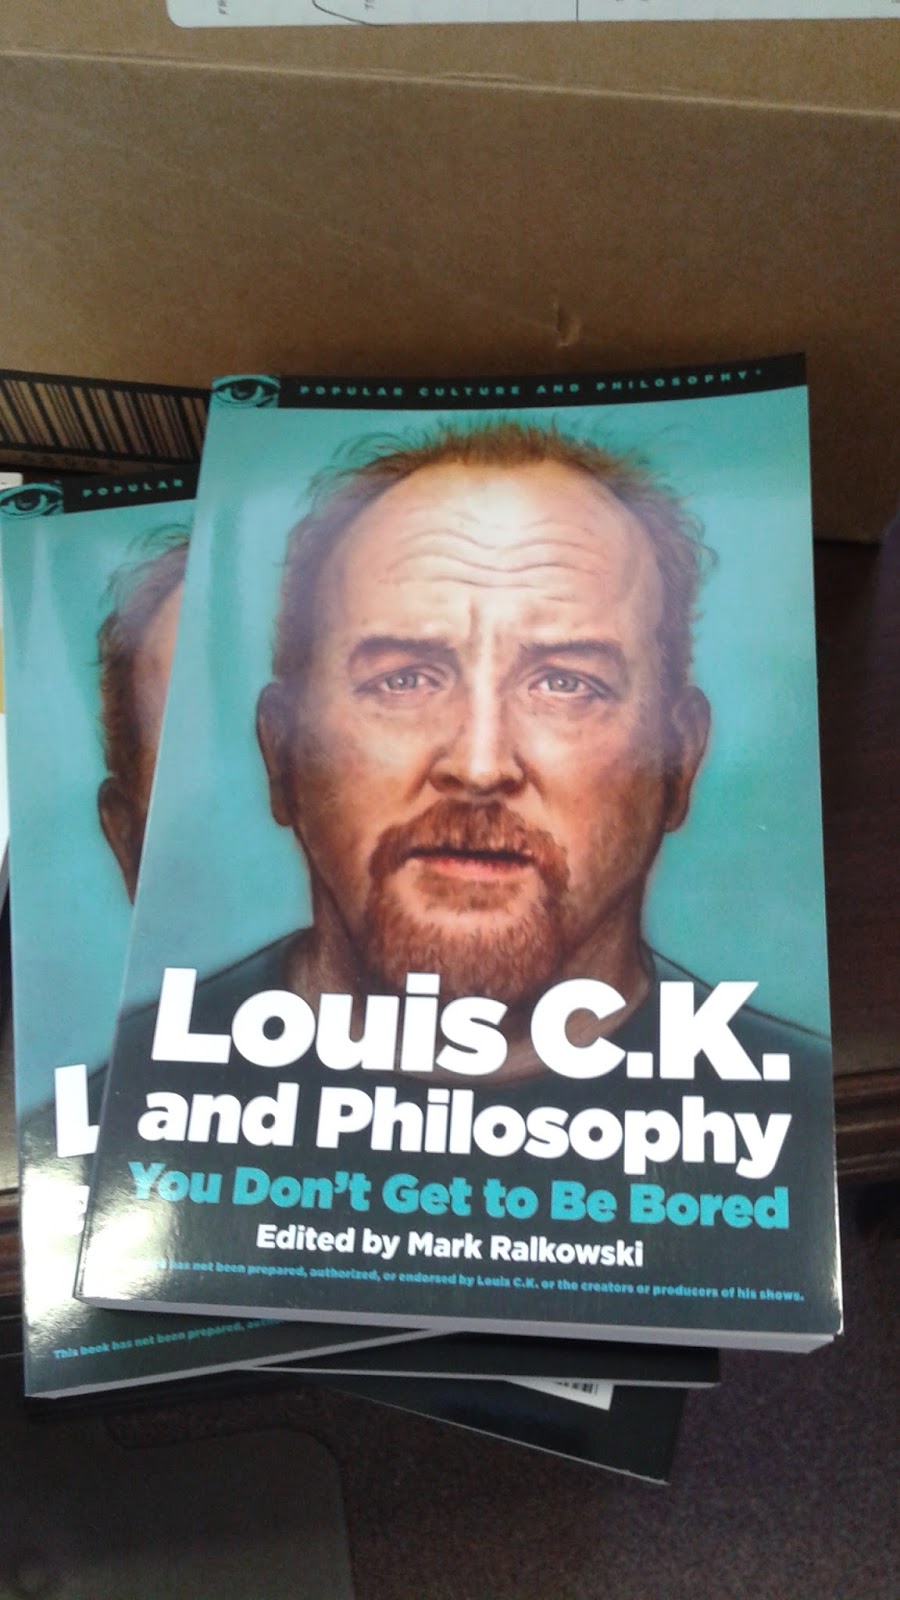 Examined Worlds: Louis C. K. and Philosophy, a Book Review, and More